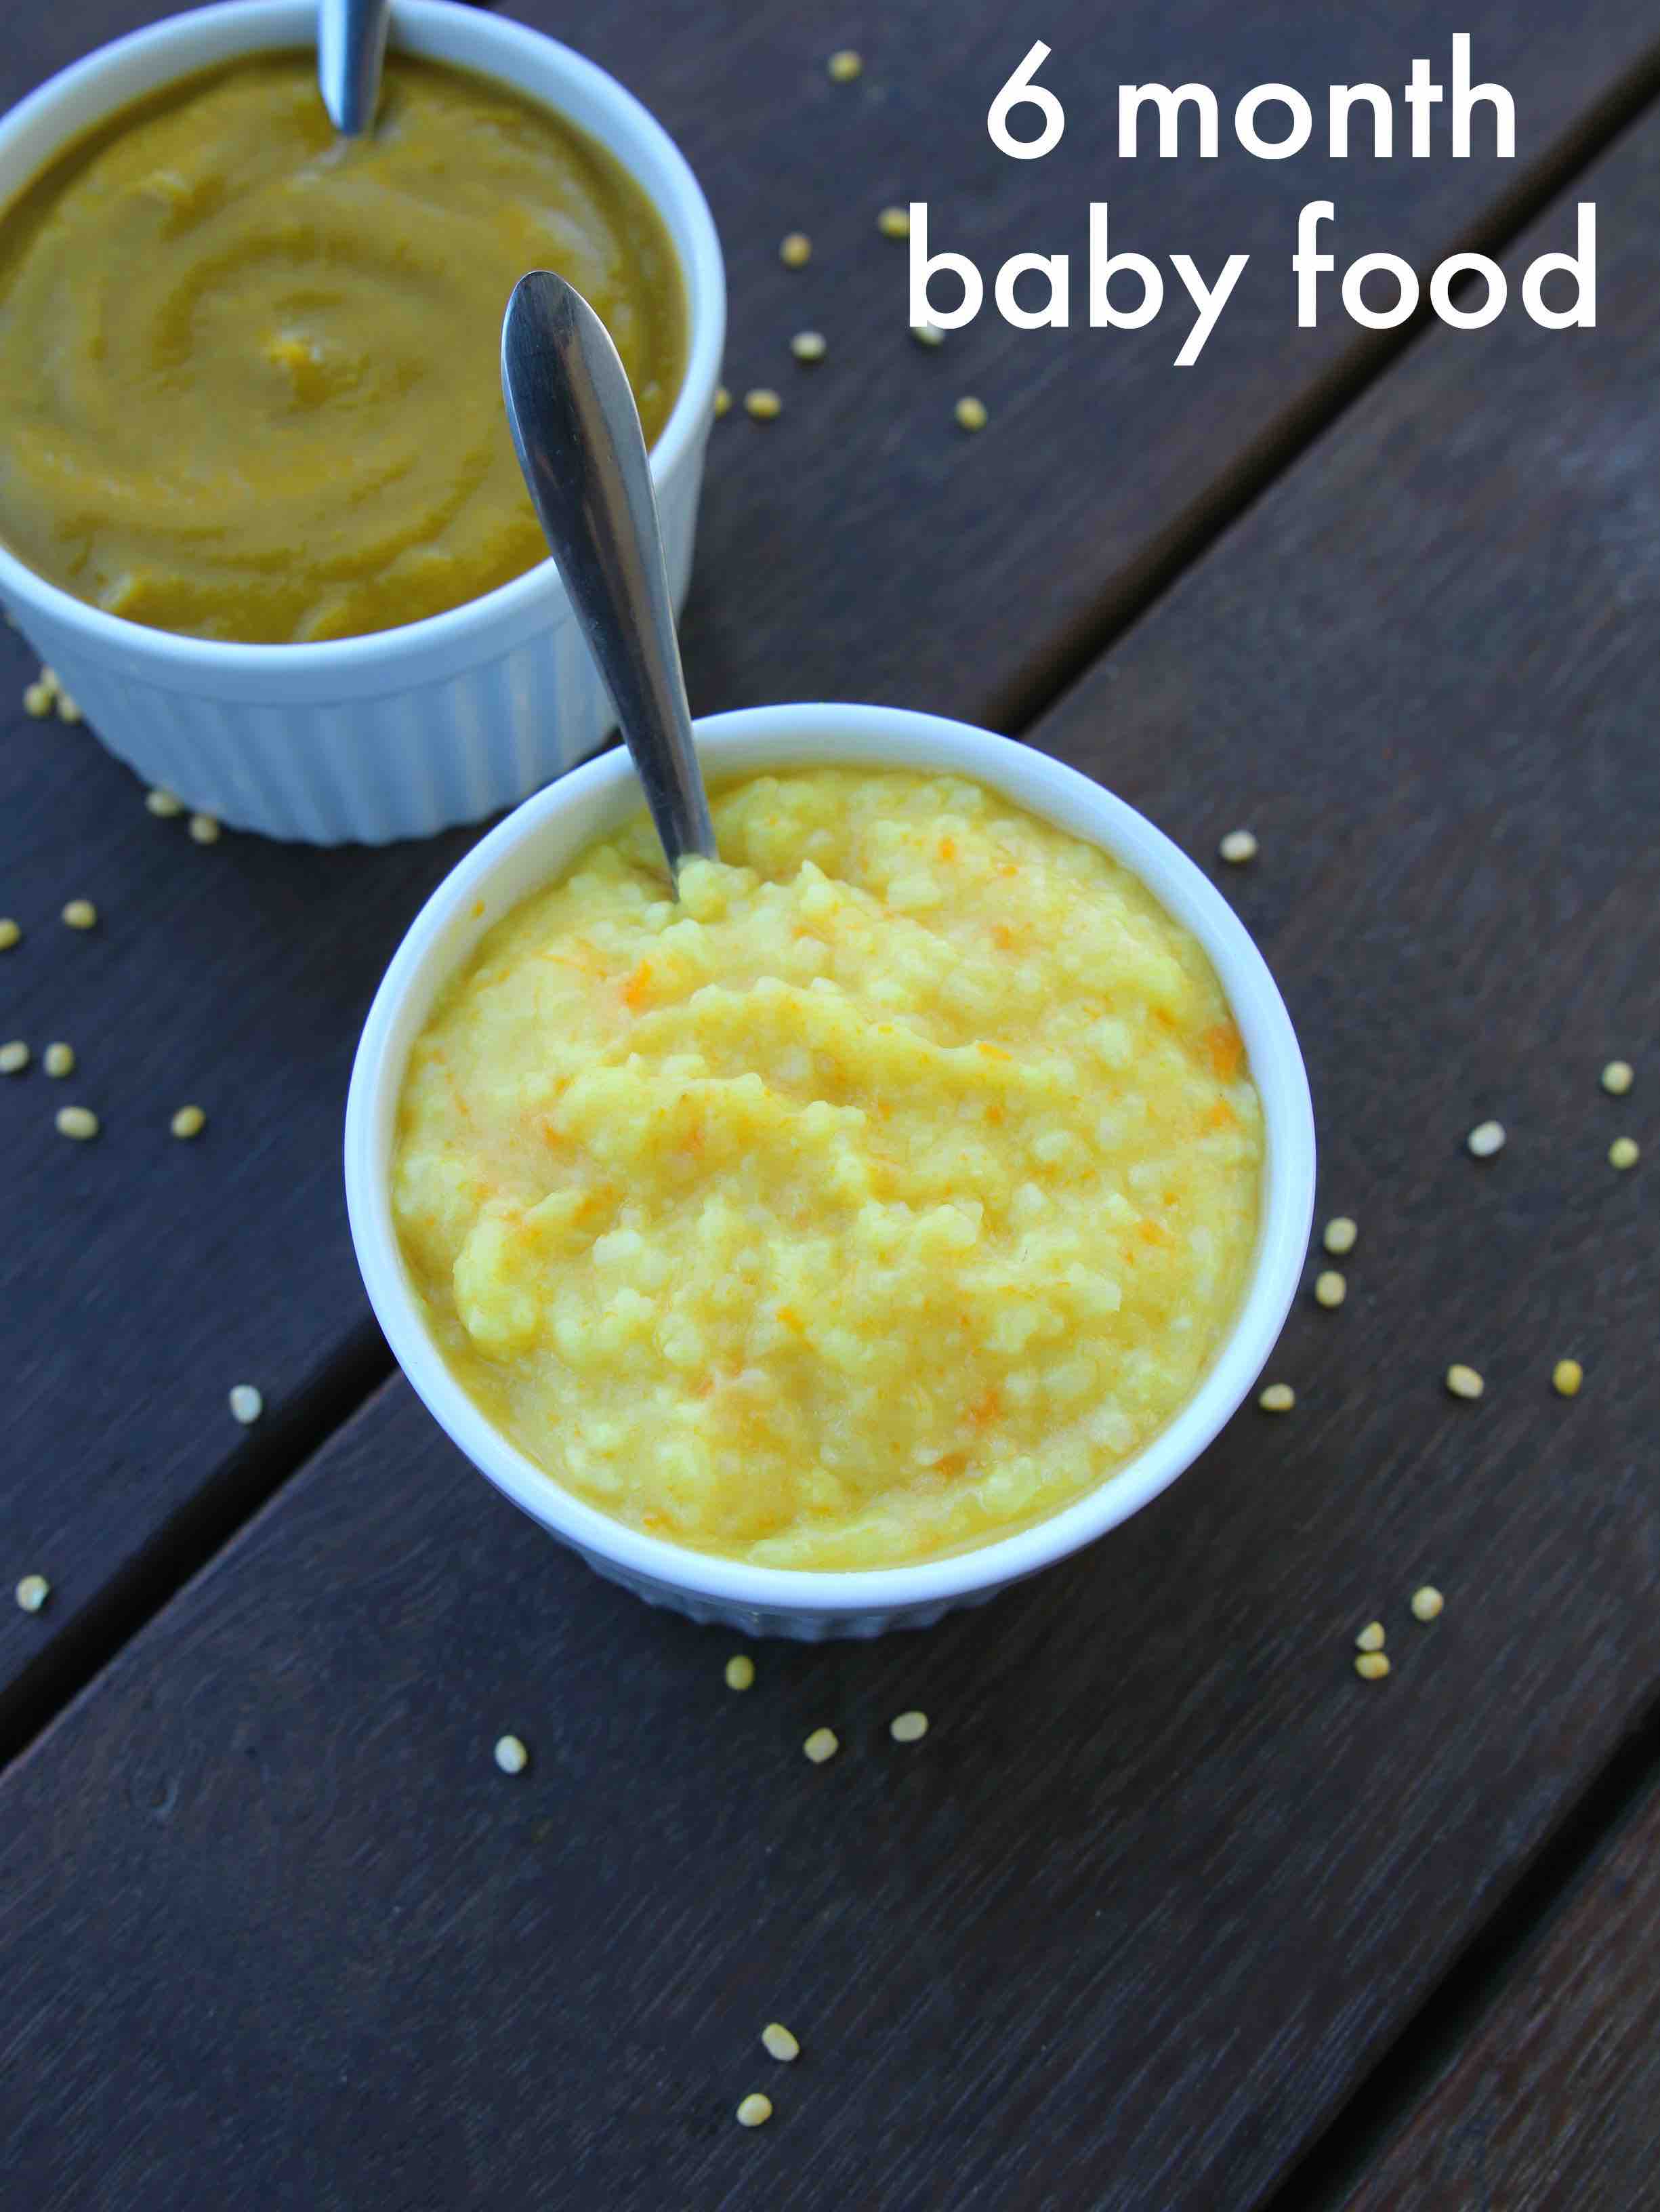 puree food for baby 6 months